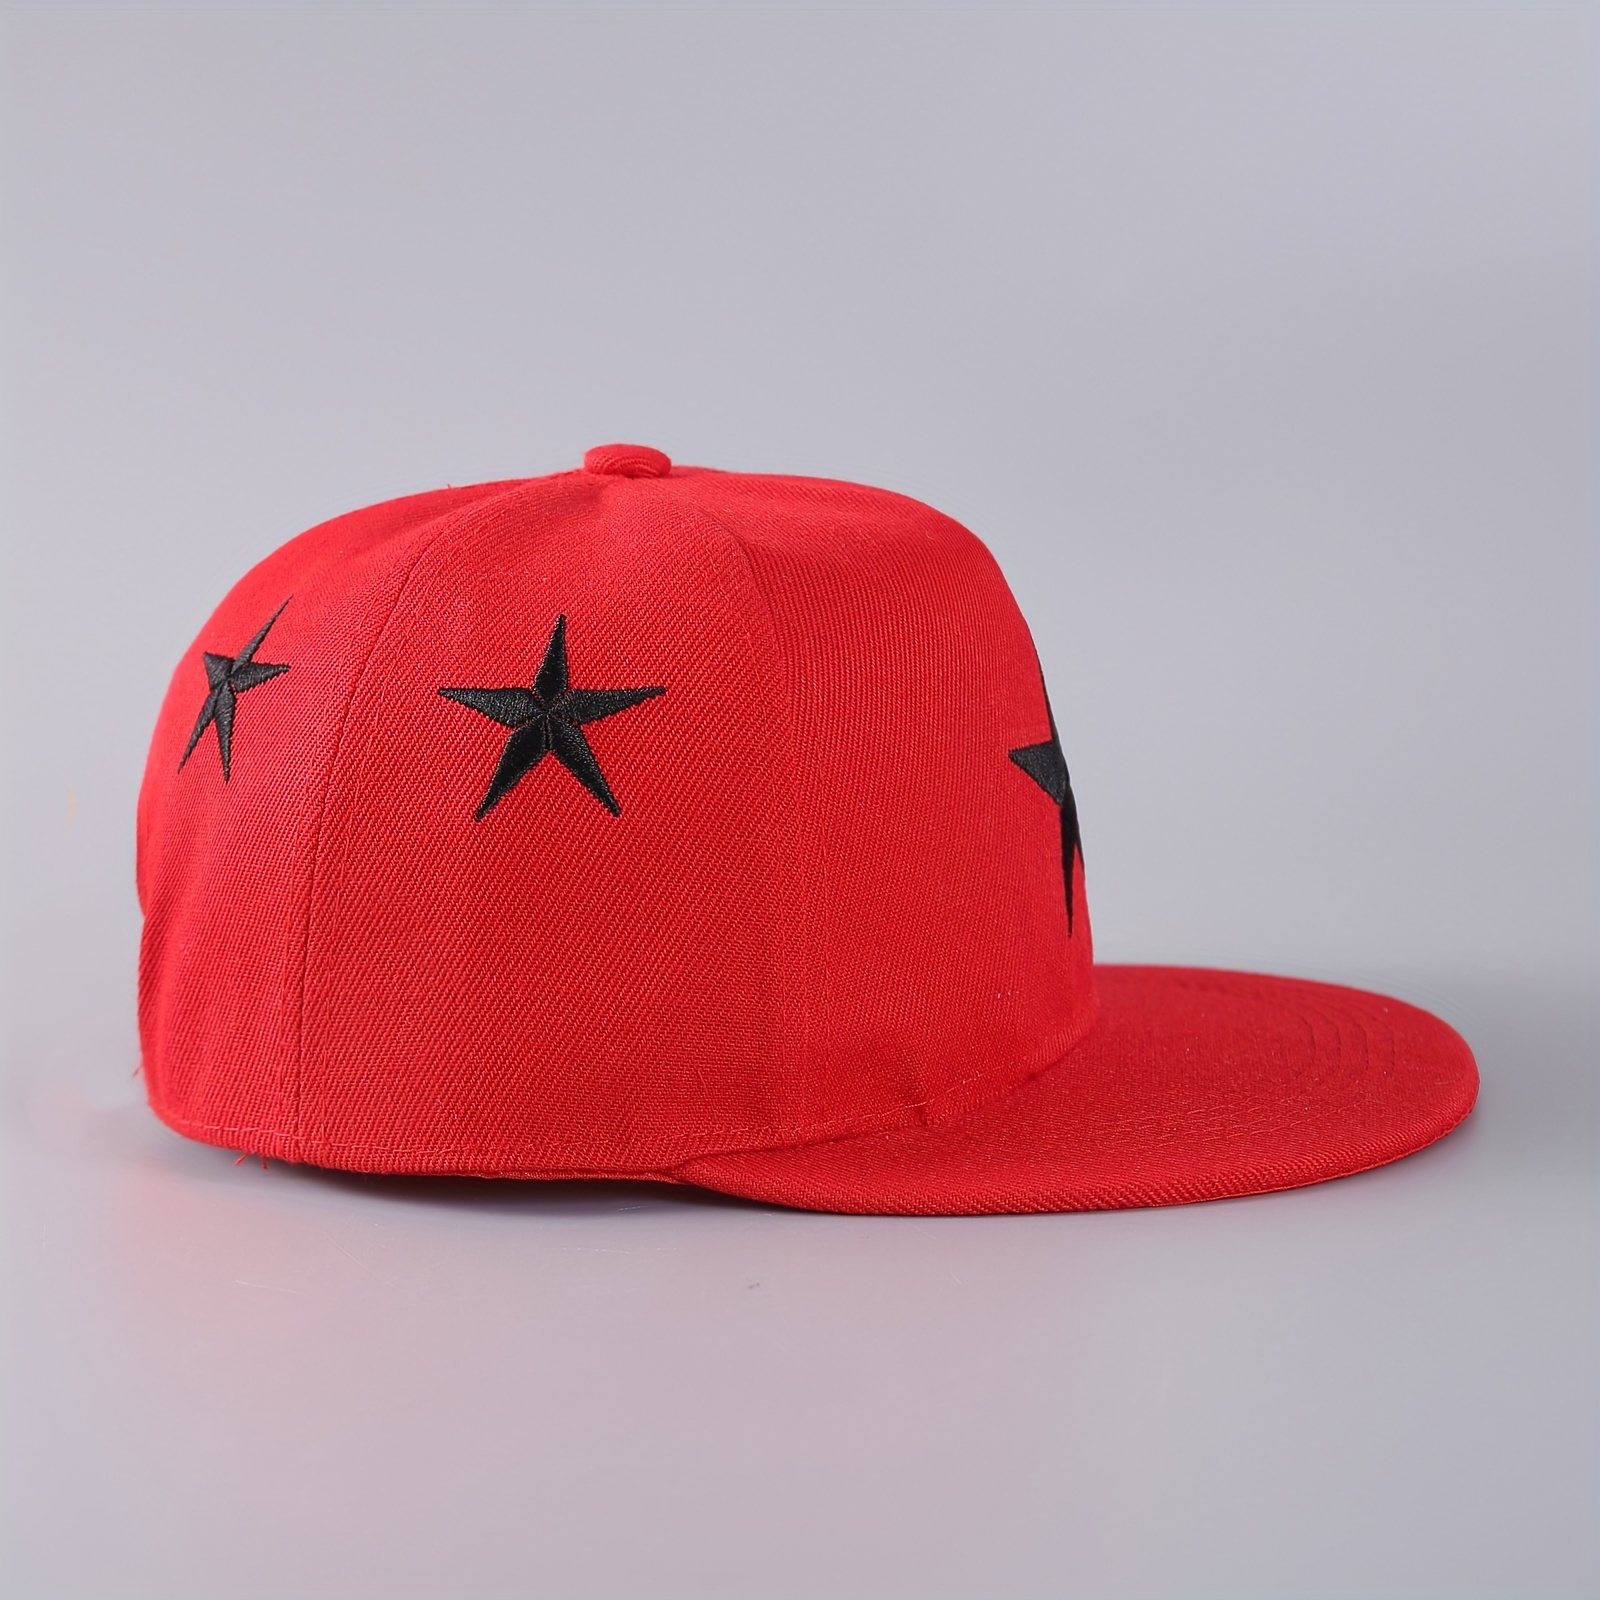 Embroidered Mesh Cap, Embroidery Baseball Cap, Five-pointed Star